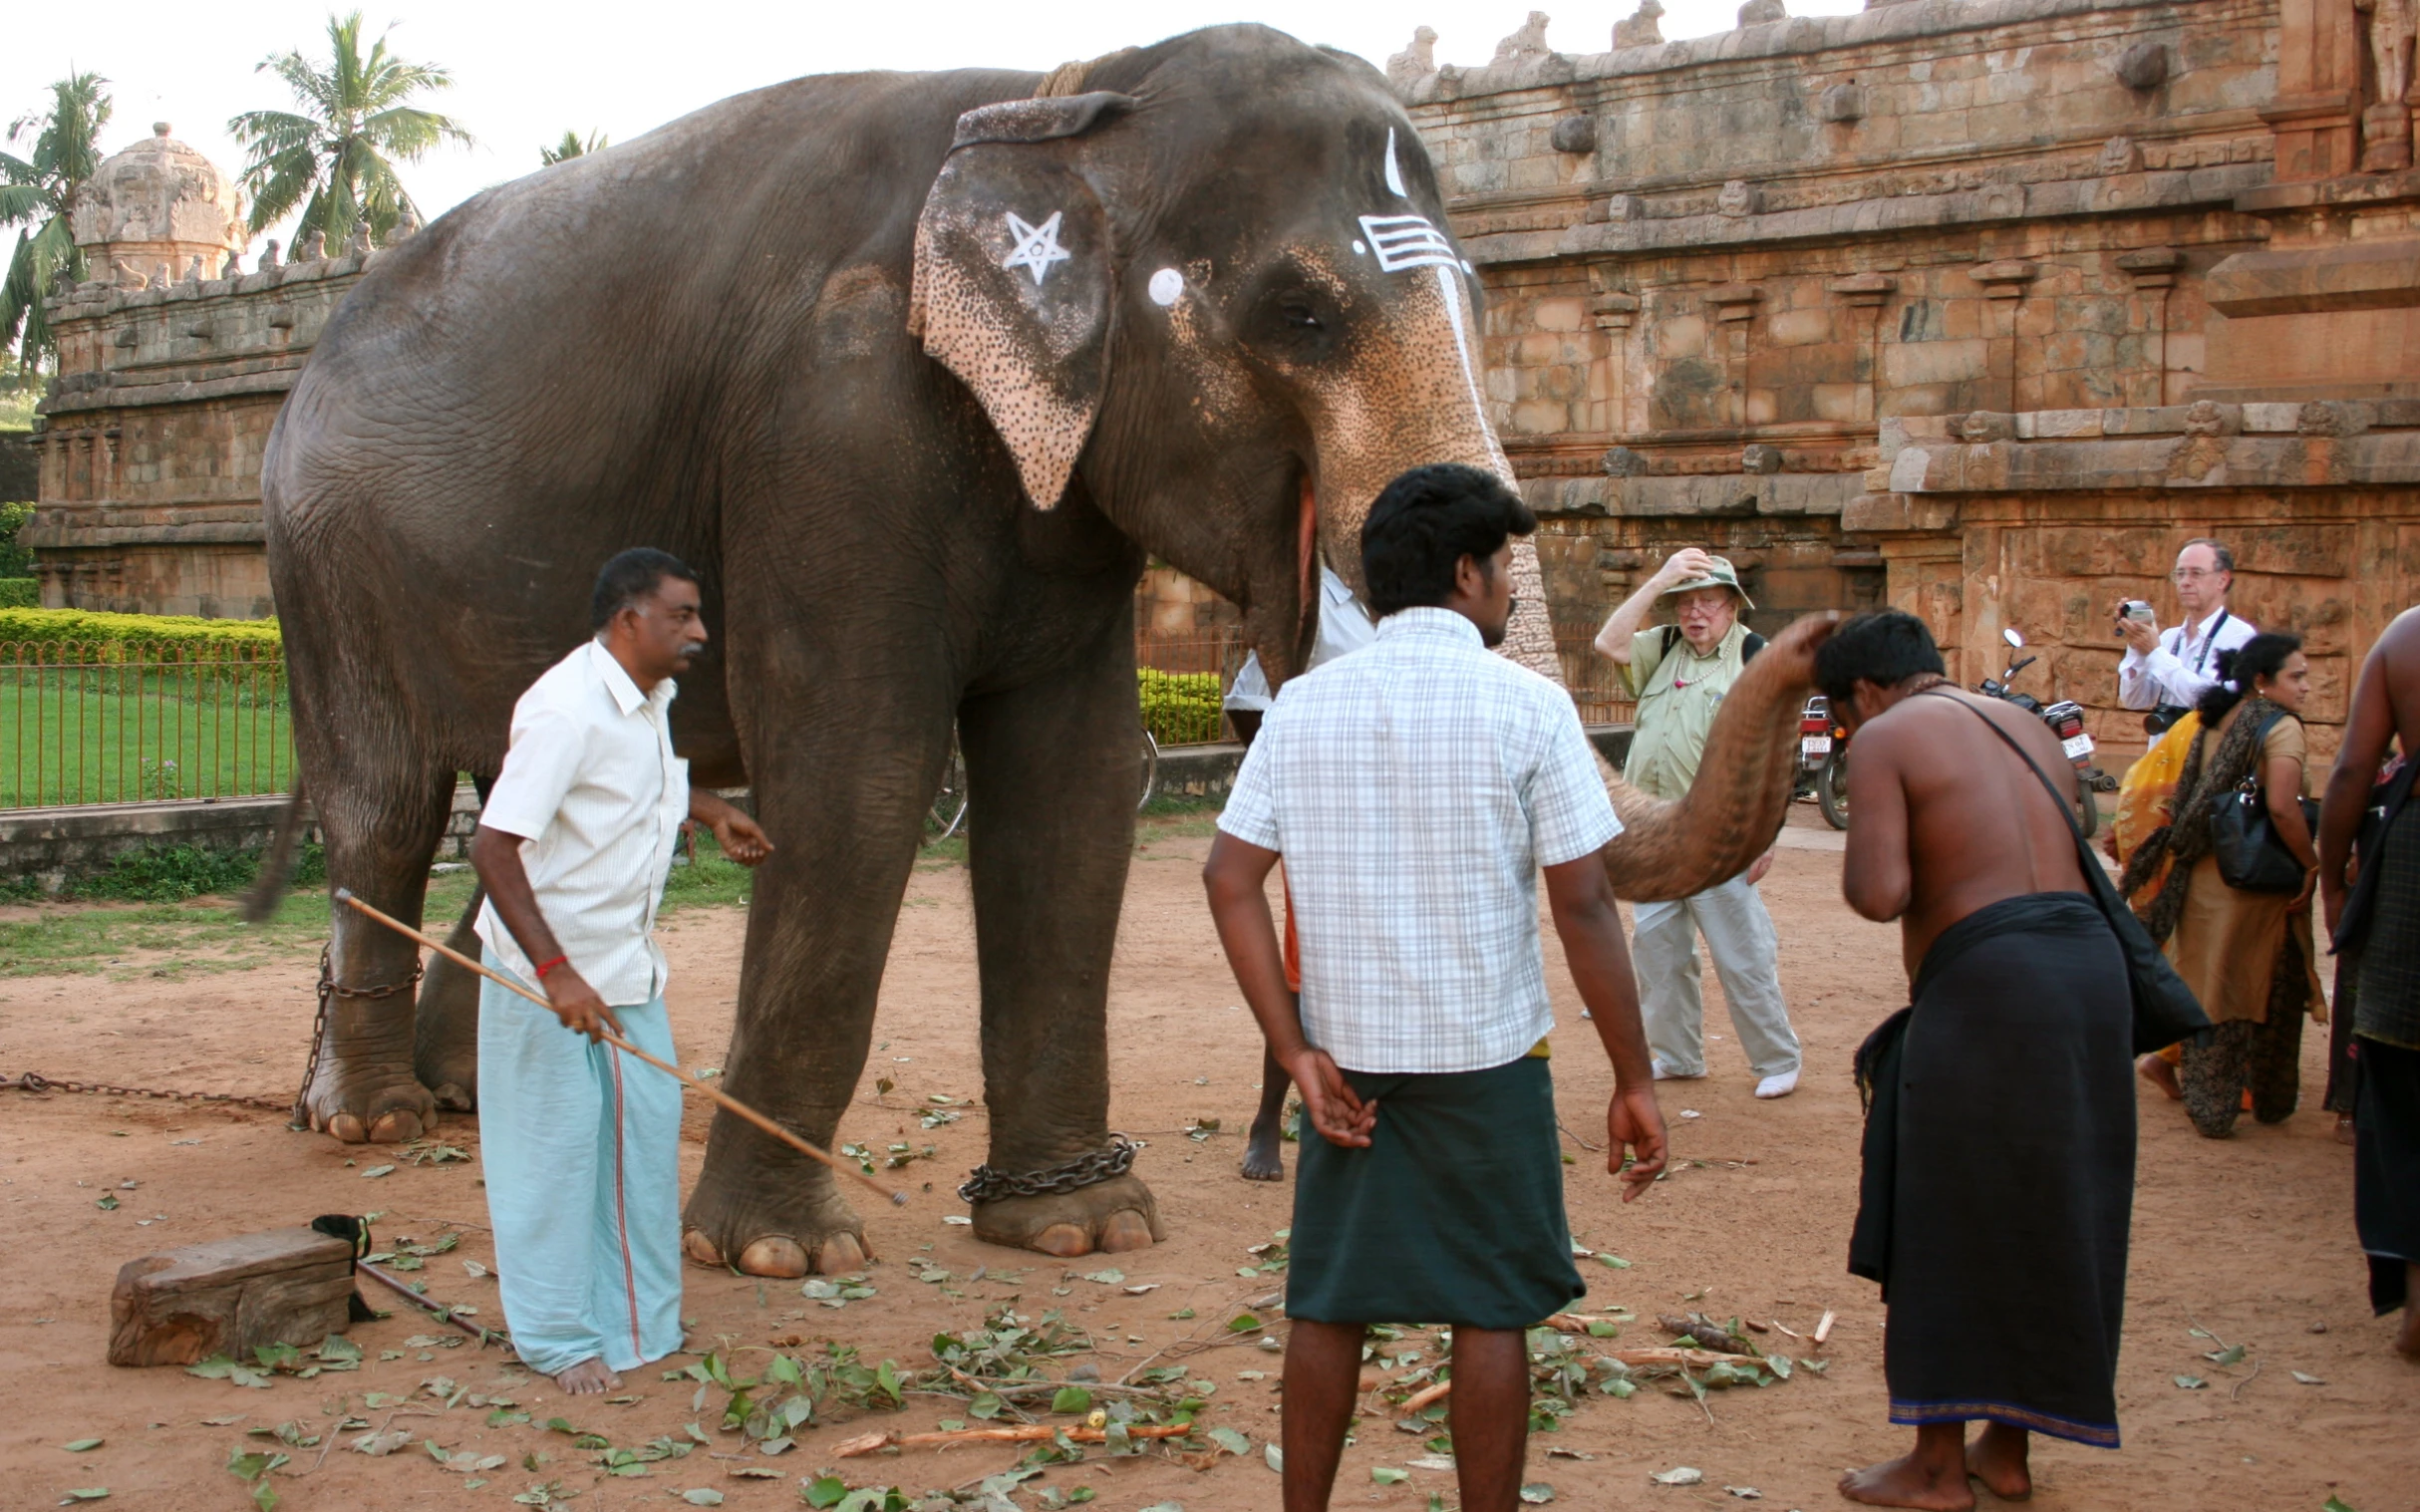 some people taking pictures and a man standing in front of an elephant